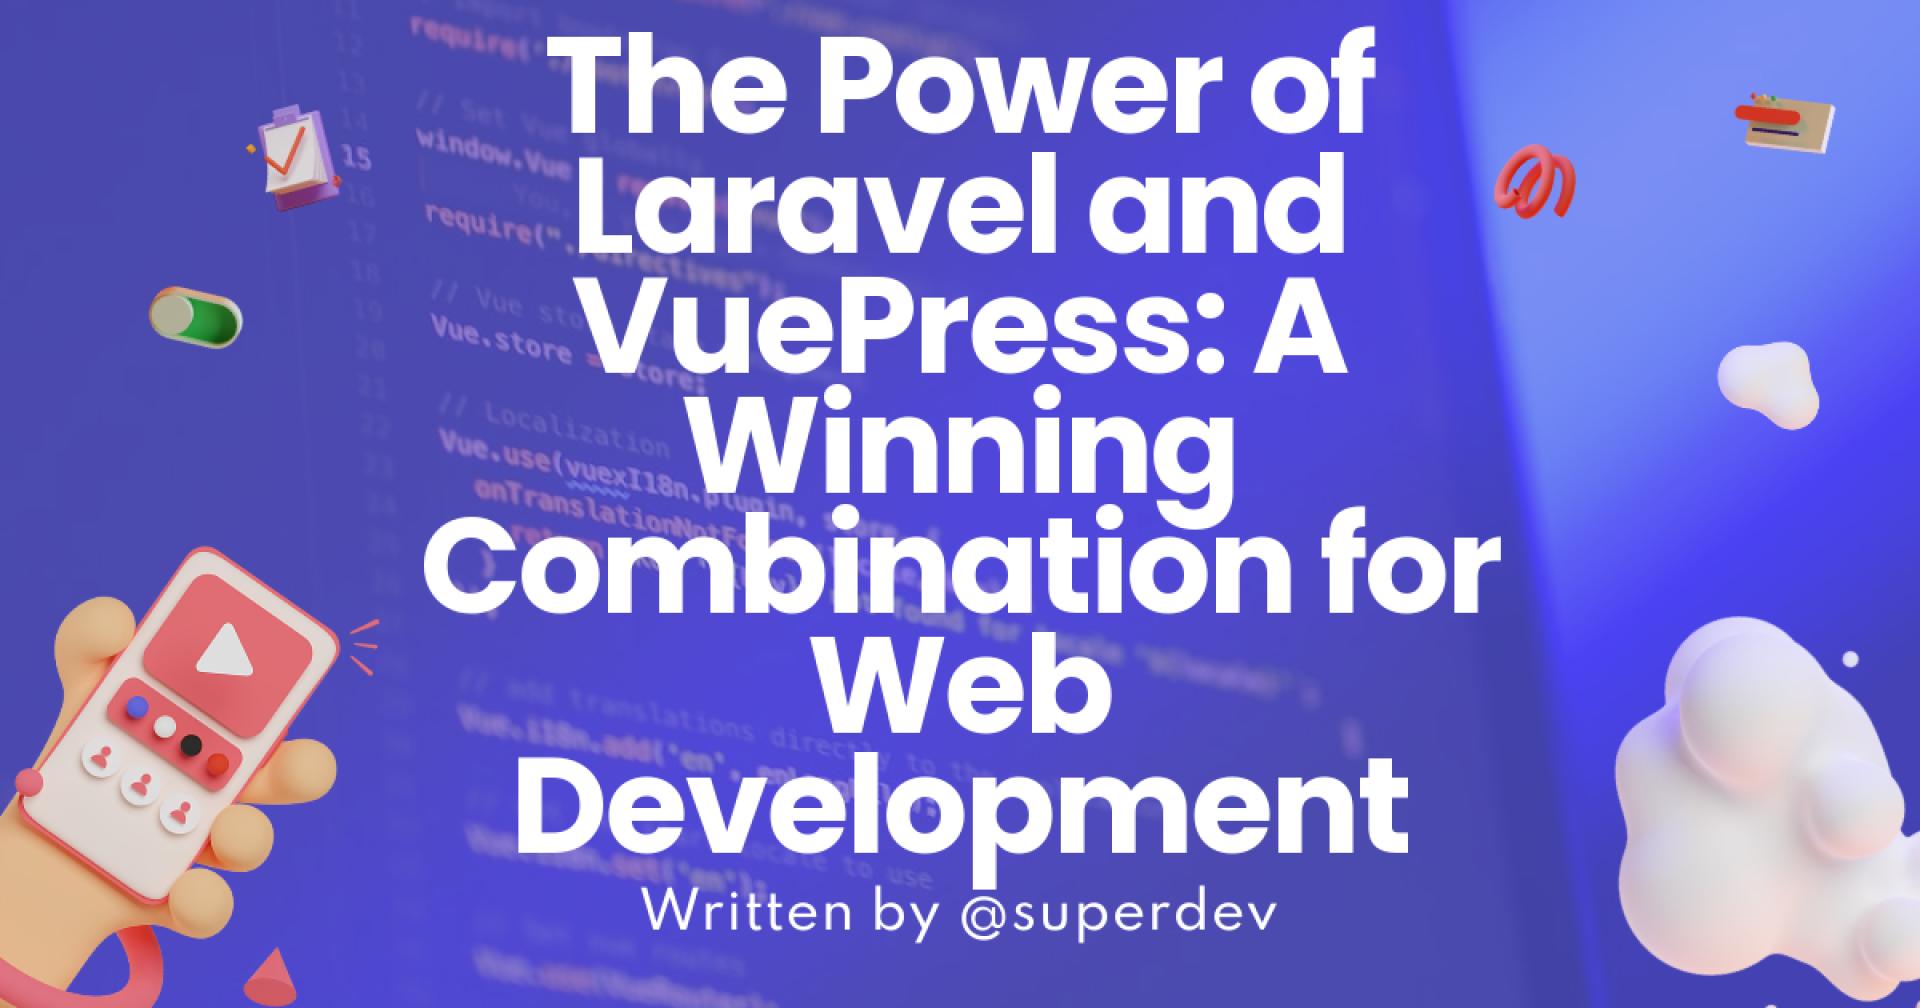 The Power of Laravel and VuePress: A Winning Combination for Web Development